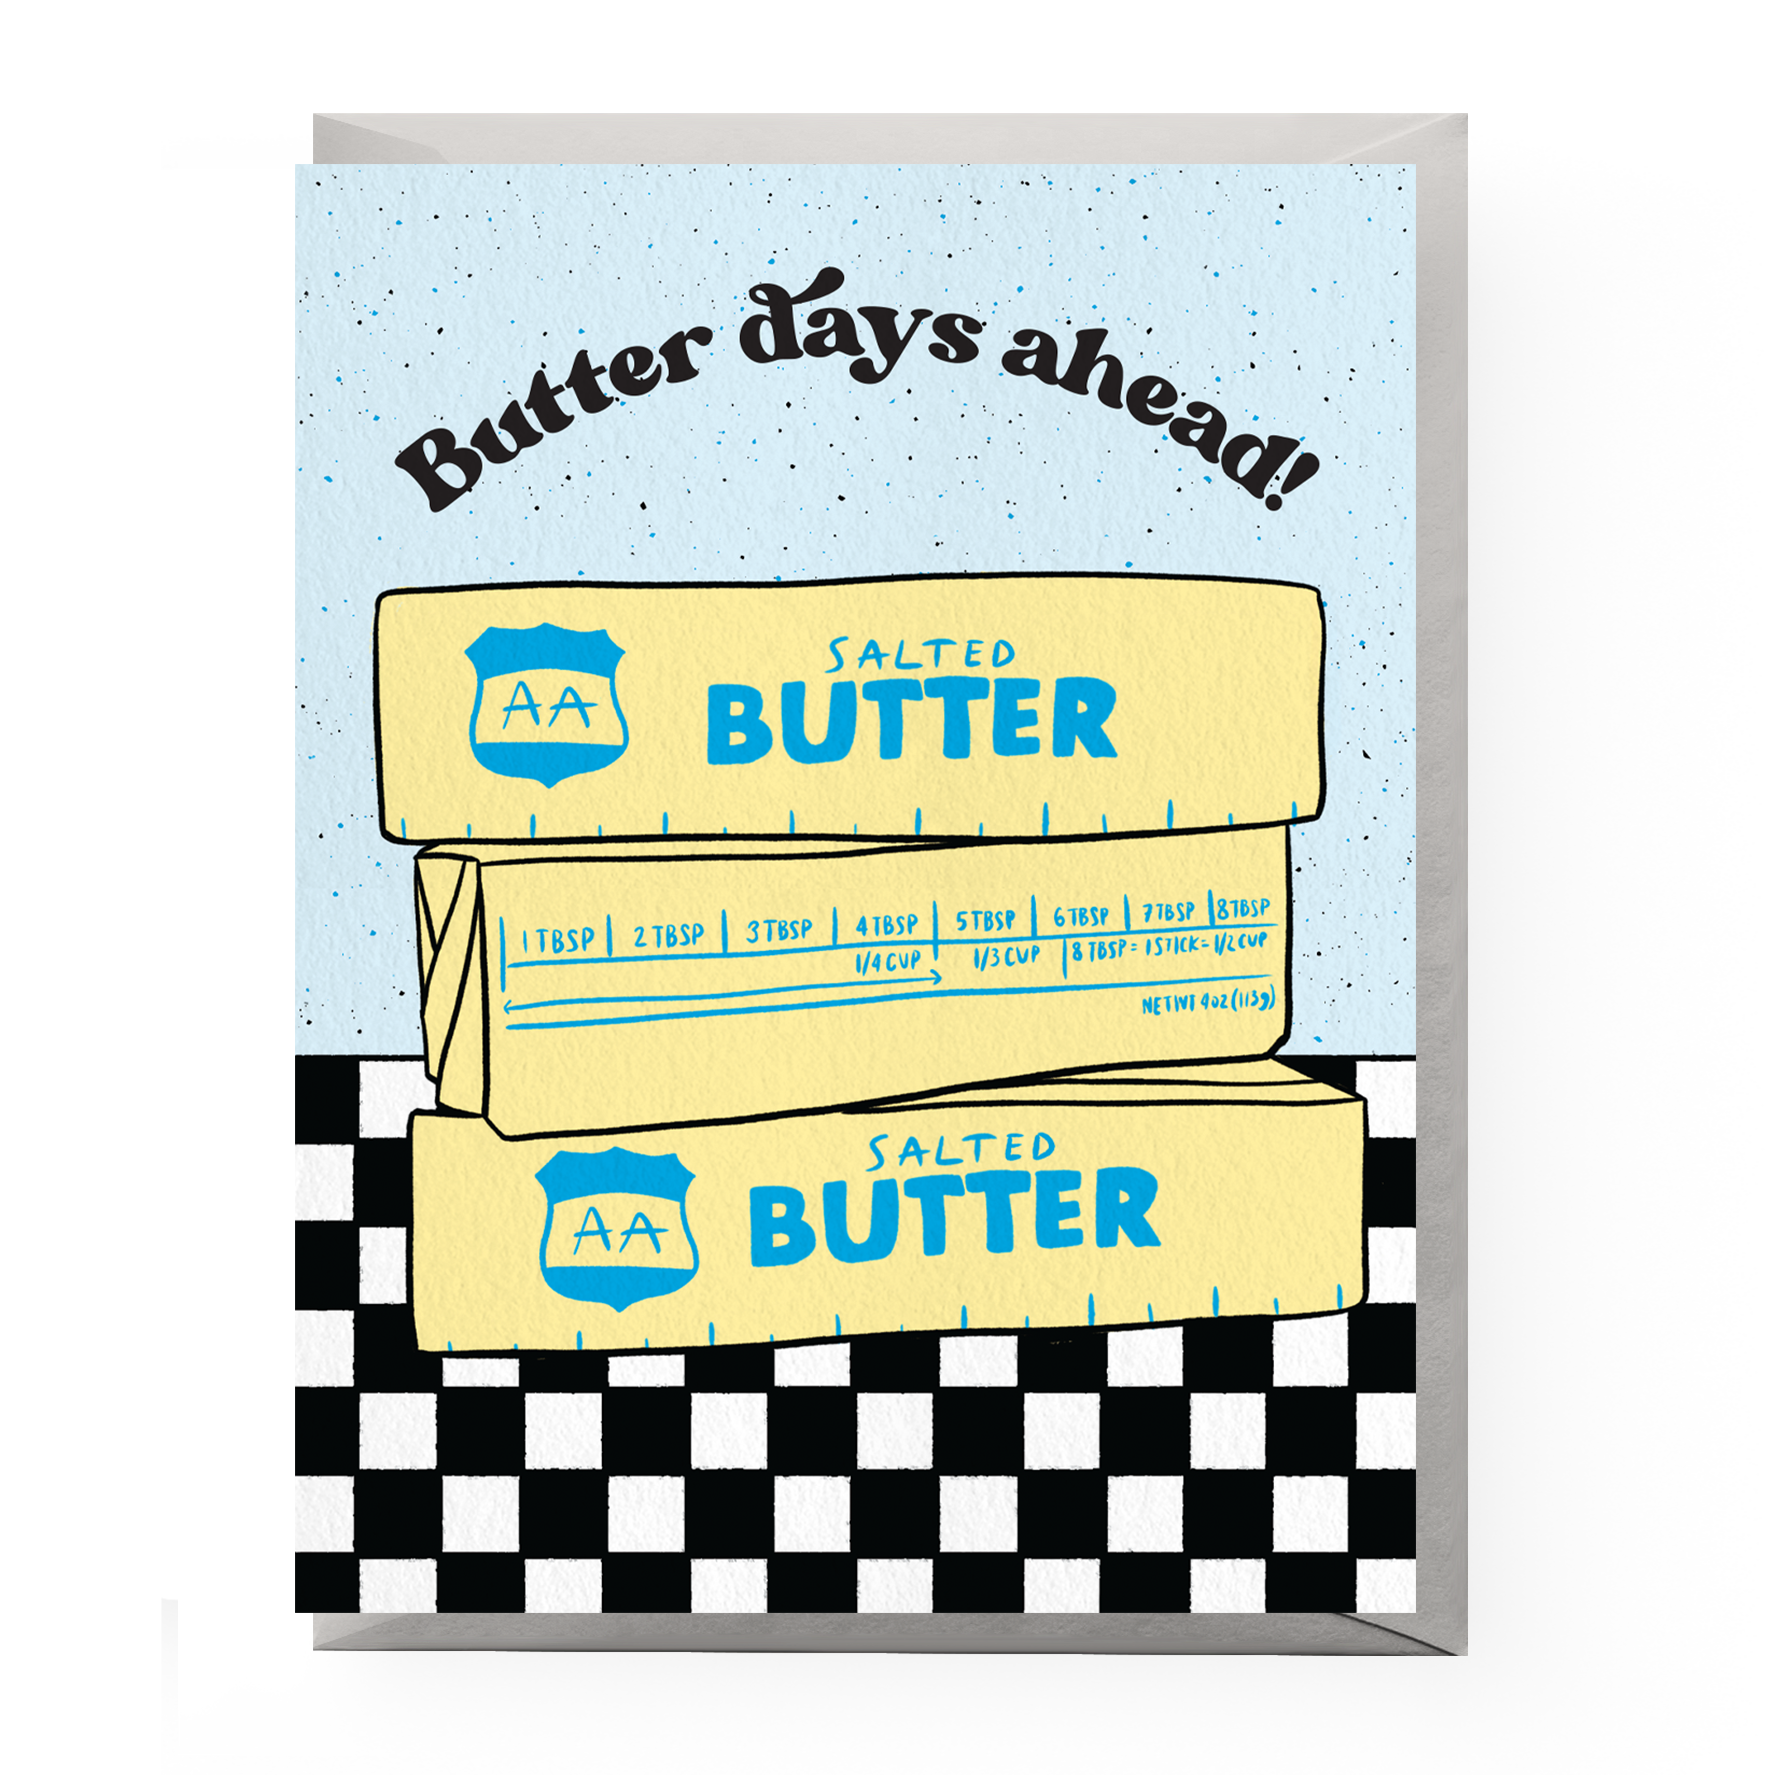 Greeting card that is half speckled light blue on top and white/black checkerboard on the bottom. Top of the card reads "Butter days ahead!" Below it are three sticks of salted butter